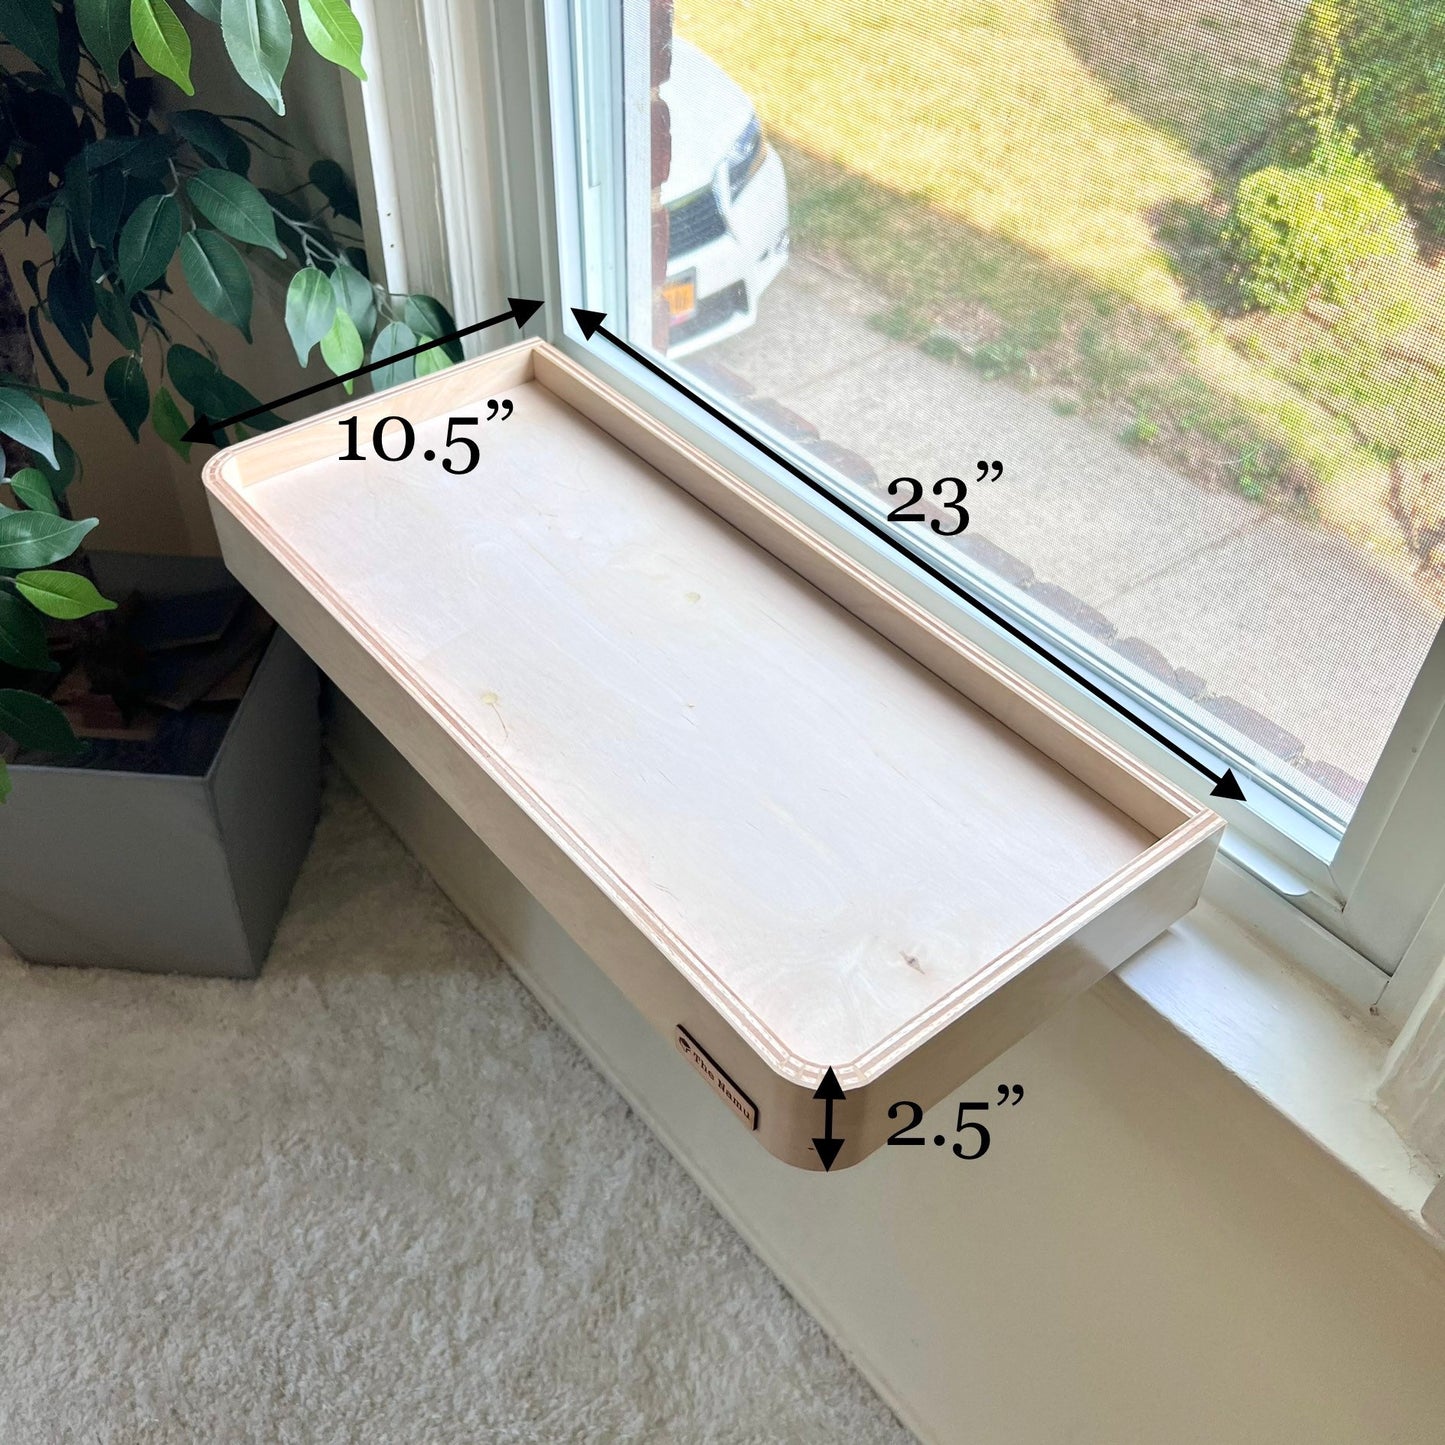 23"x10" Cat Window Perch_Sturdy-Safe support leg_Installed-removed 1 minute_No tools No nails_Cat Window Shelf_Window Cat Bed_Cat Lover Gift